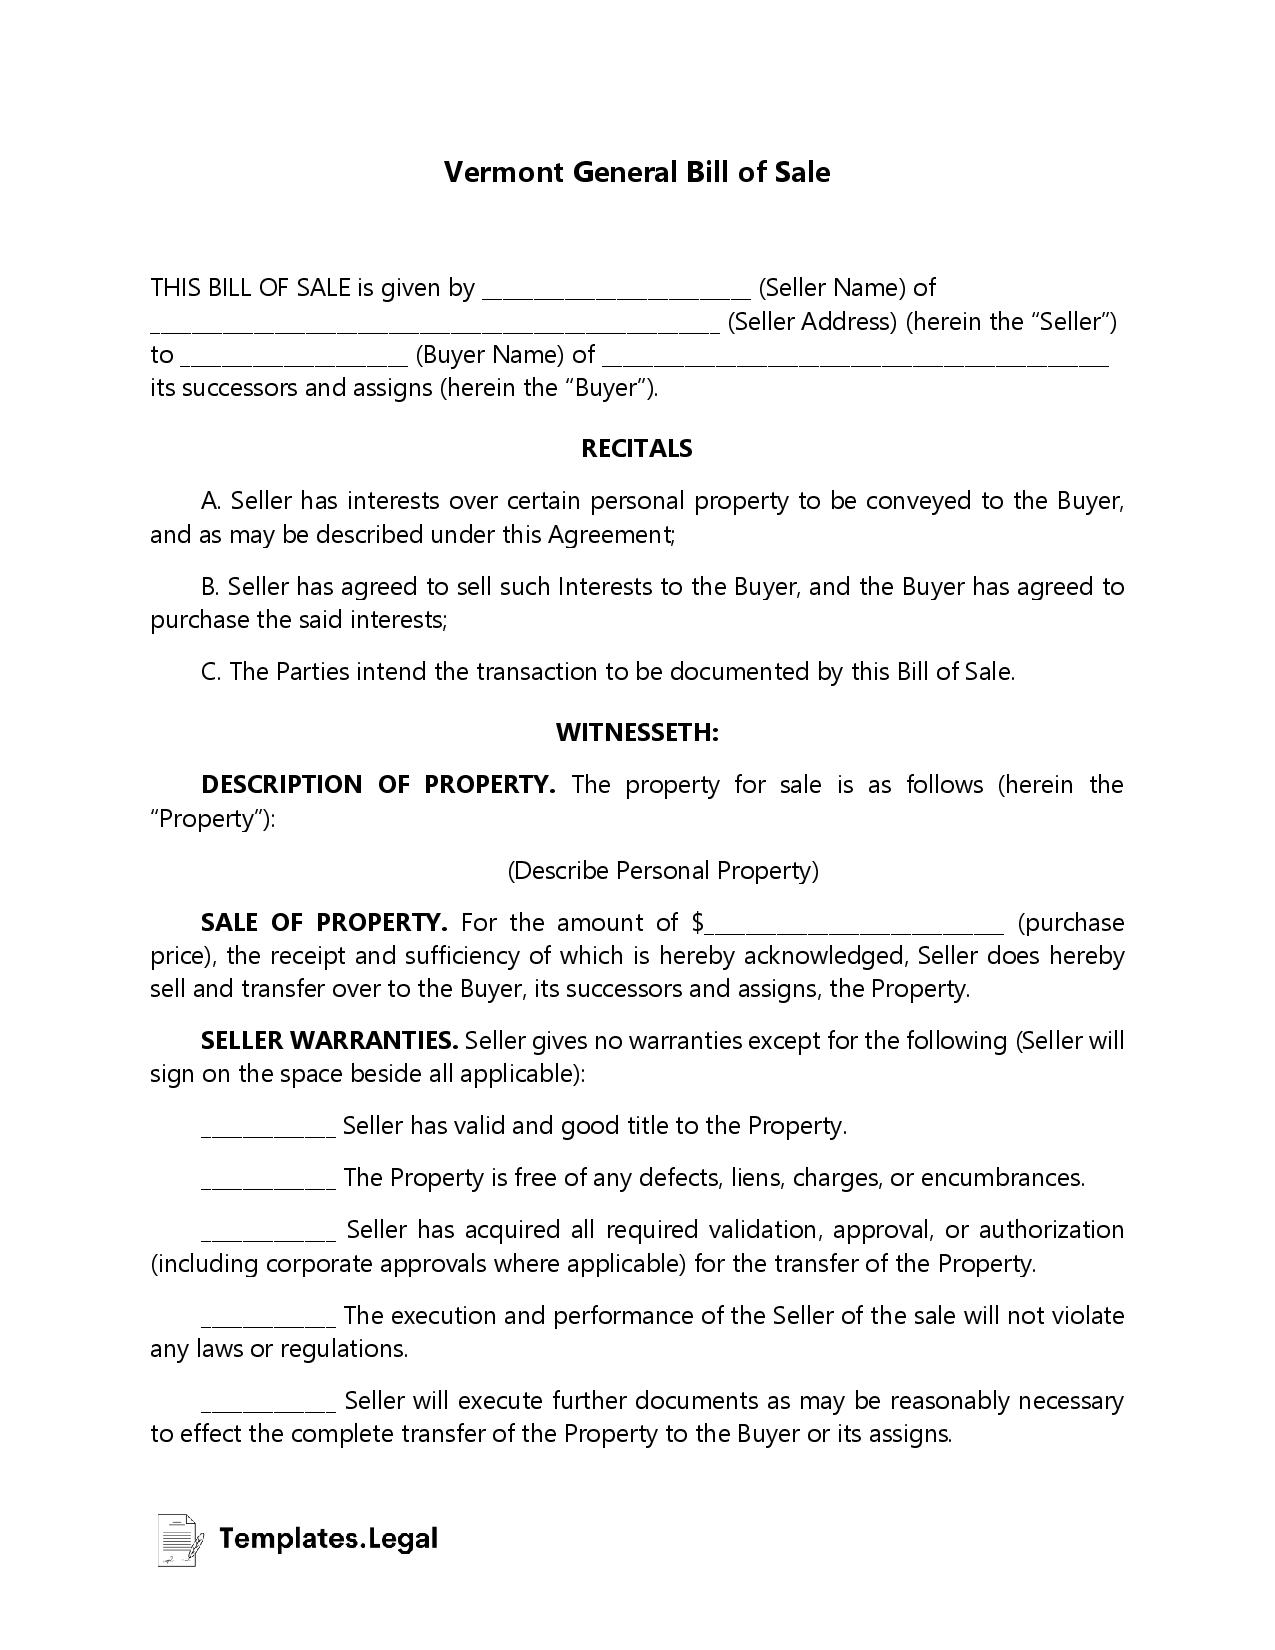 Vermont General Bill of Sale - Templates.Legal